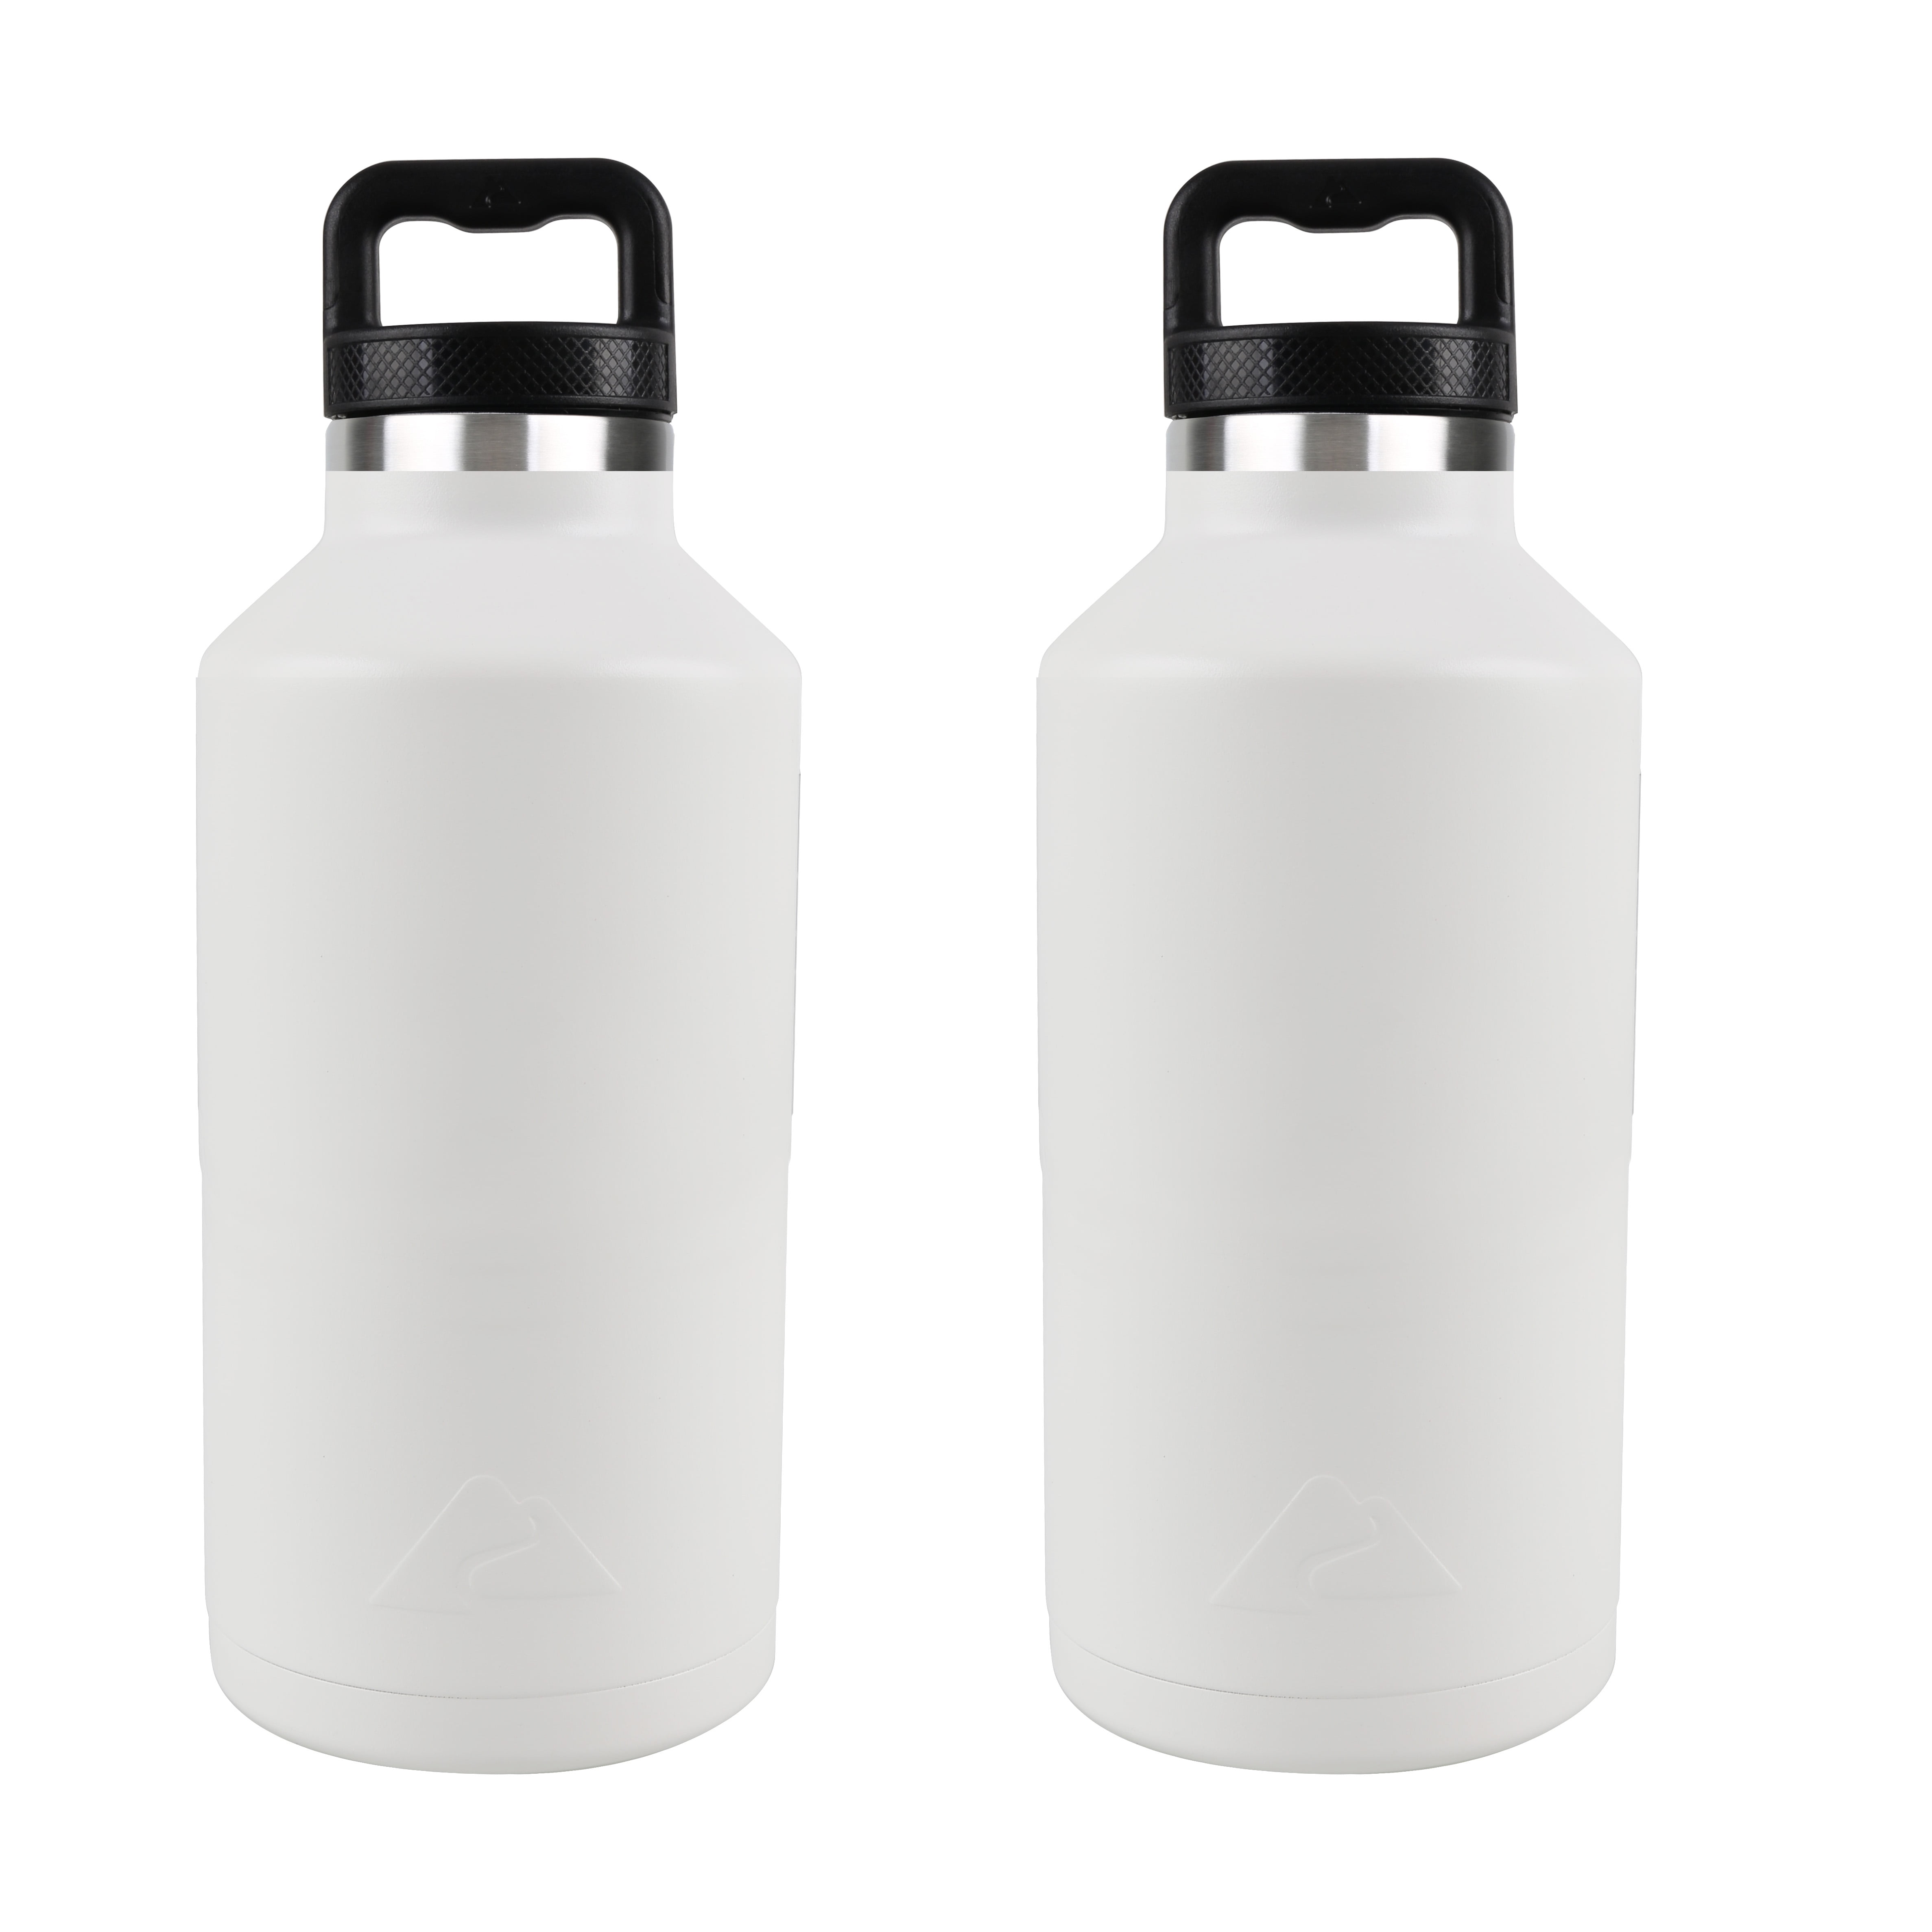 Ozark Trail 64 oz White Double Wall Vacuum Sealed Stainless Steel Water Ozark Trail 64 Ounce Double Wall Stainless Steel Water Bottle